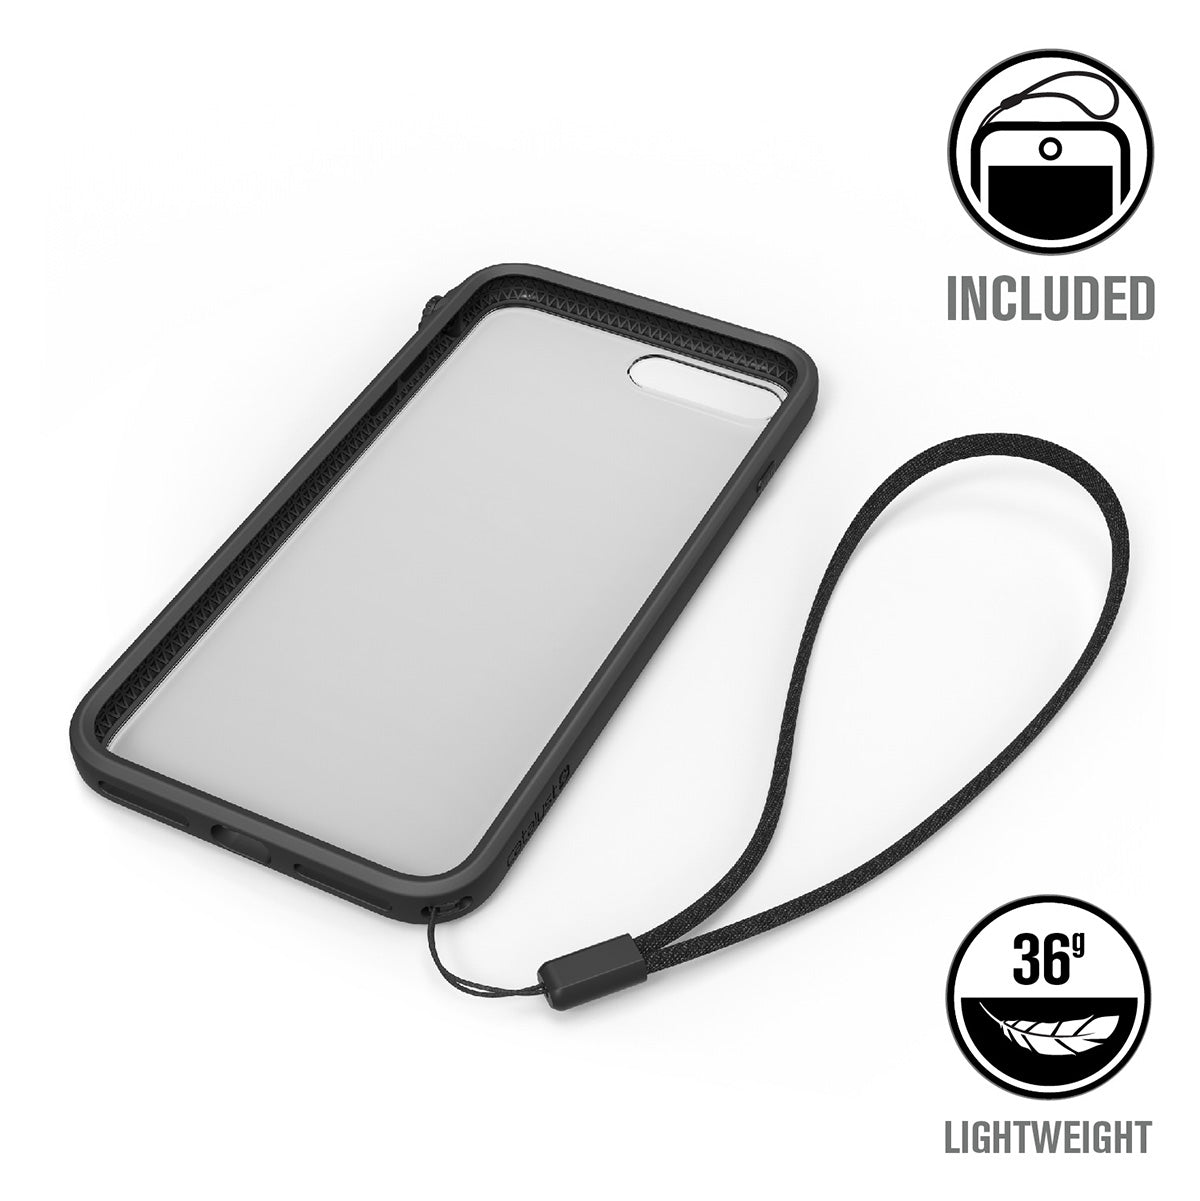 Catalyst Impact Protection Case for iPhone 8 Plus and 7 Plus showing the catalyst case with lanyard attached text reads included 36g lightweight